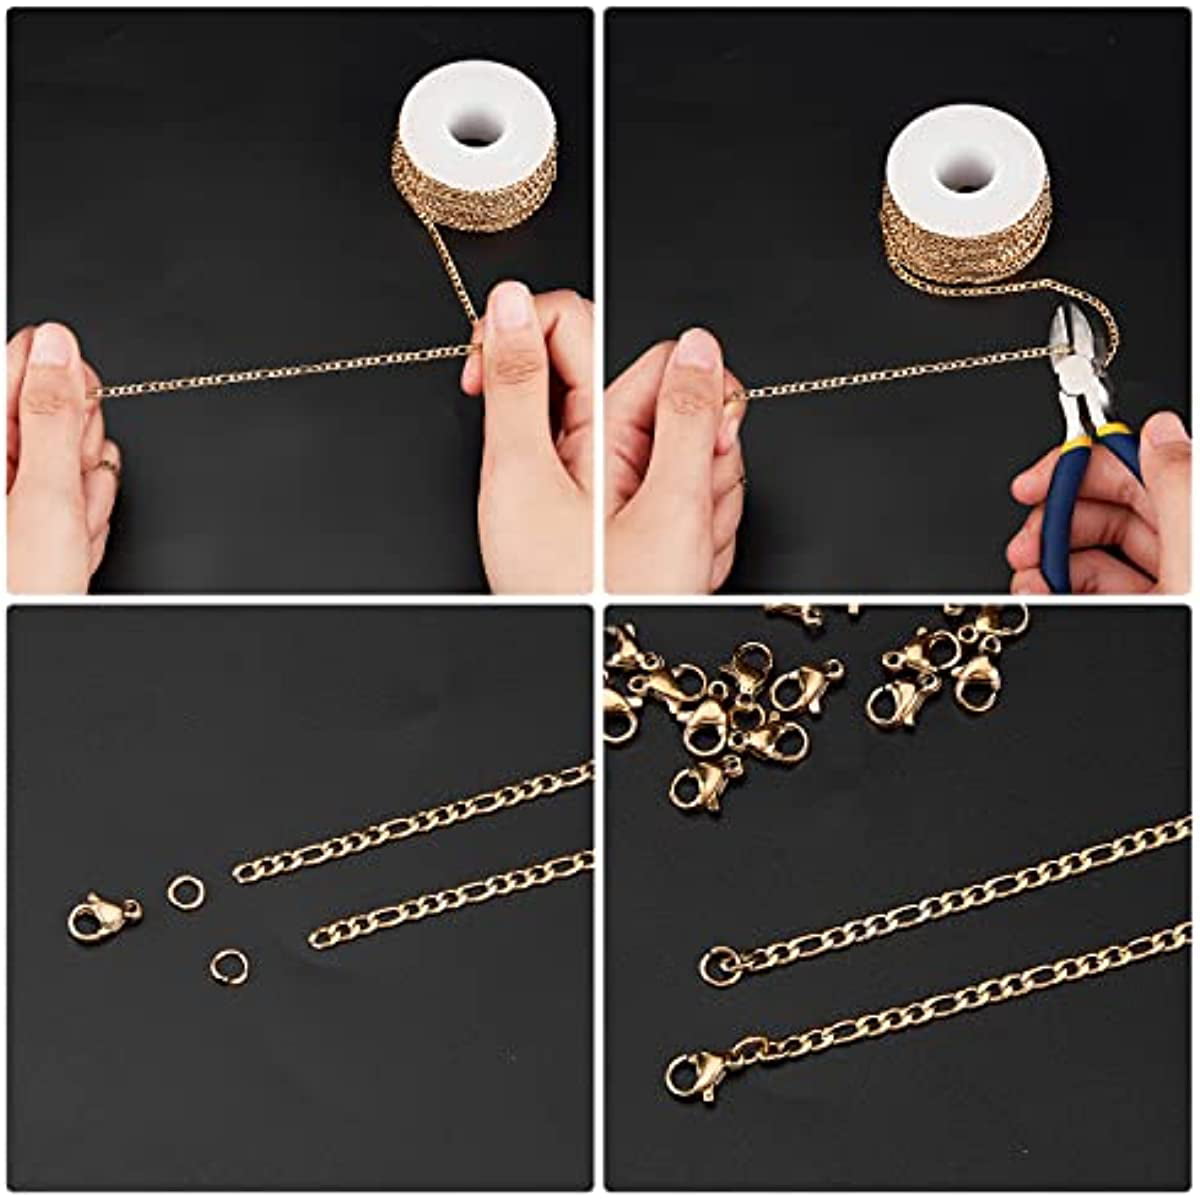 1 Roll of DIY Metal Chain Jewelry Necklace Making Link Chains Bags Crafts Chain Jewelry Making Supplies, Women's, Size: 500x0.5cm